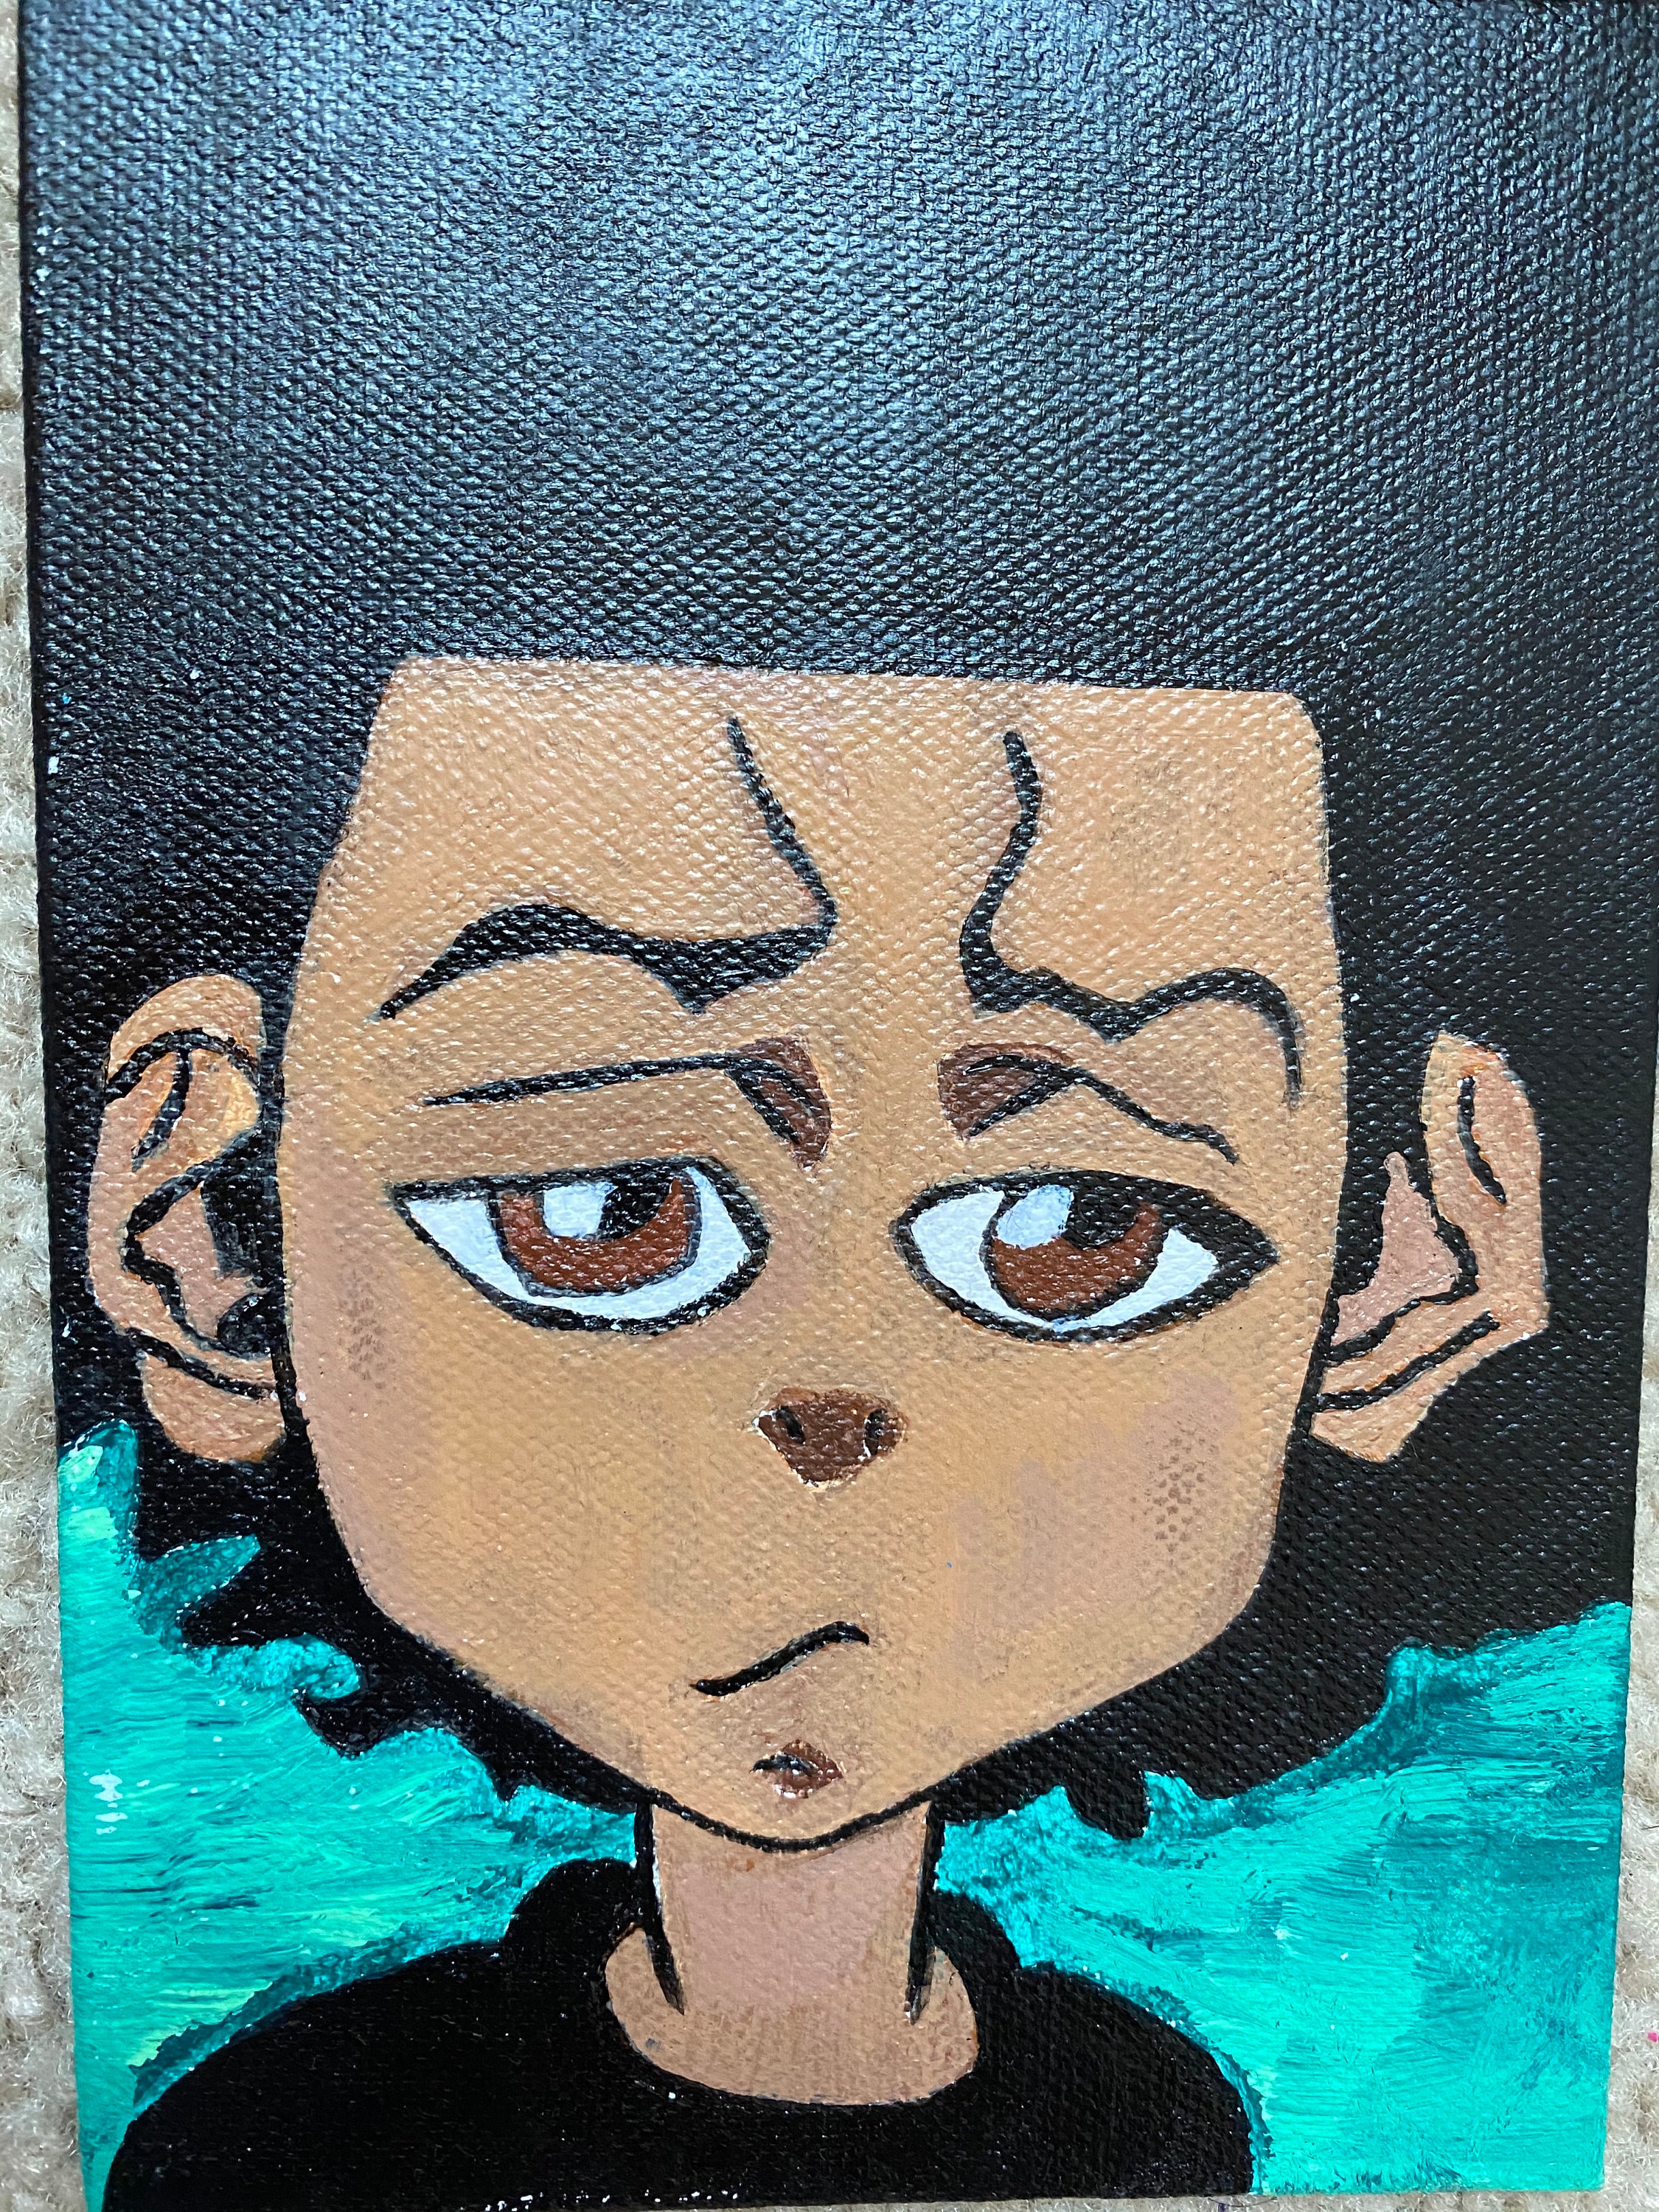 Huey from the boondocks - IV Art - Drawings & Illustration, Entertainment,  Television, Anime - ArtPal